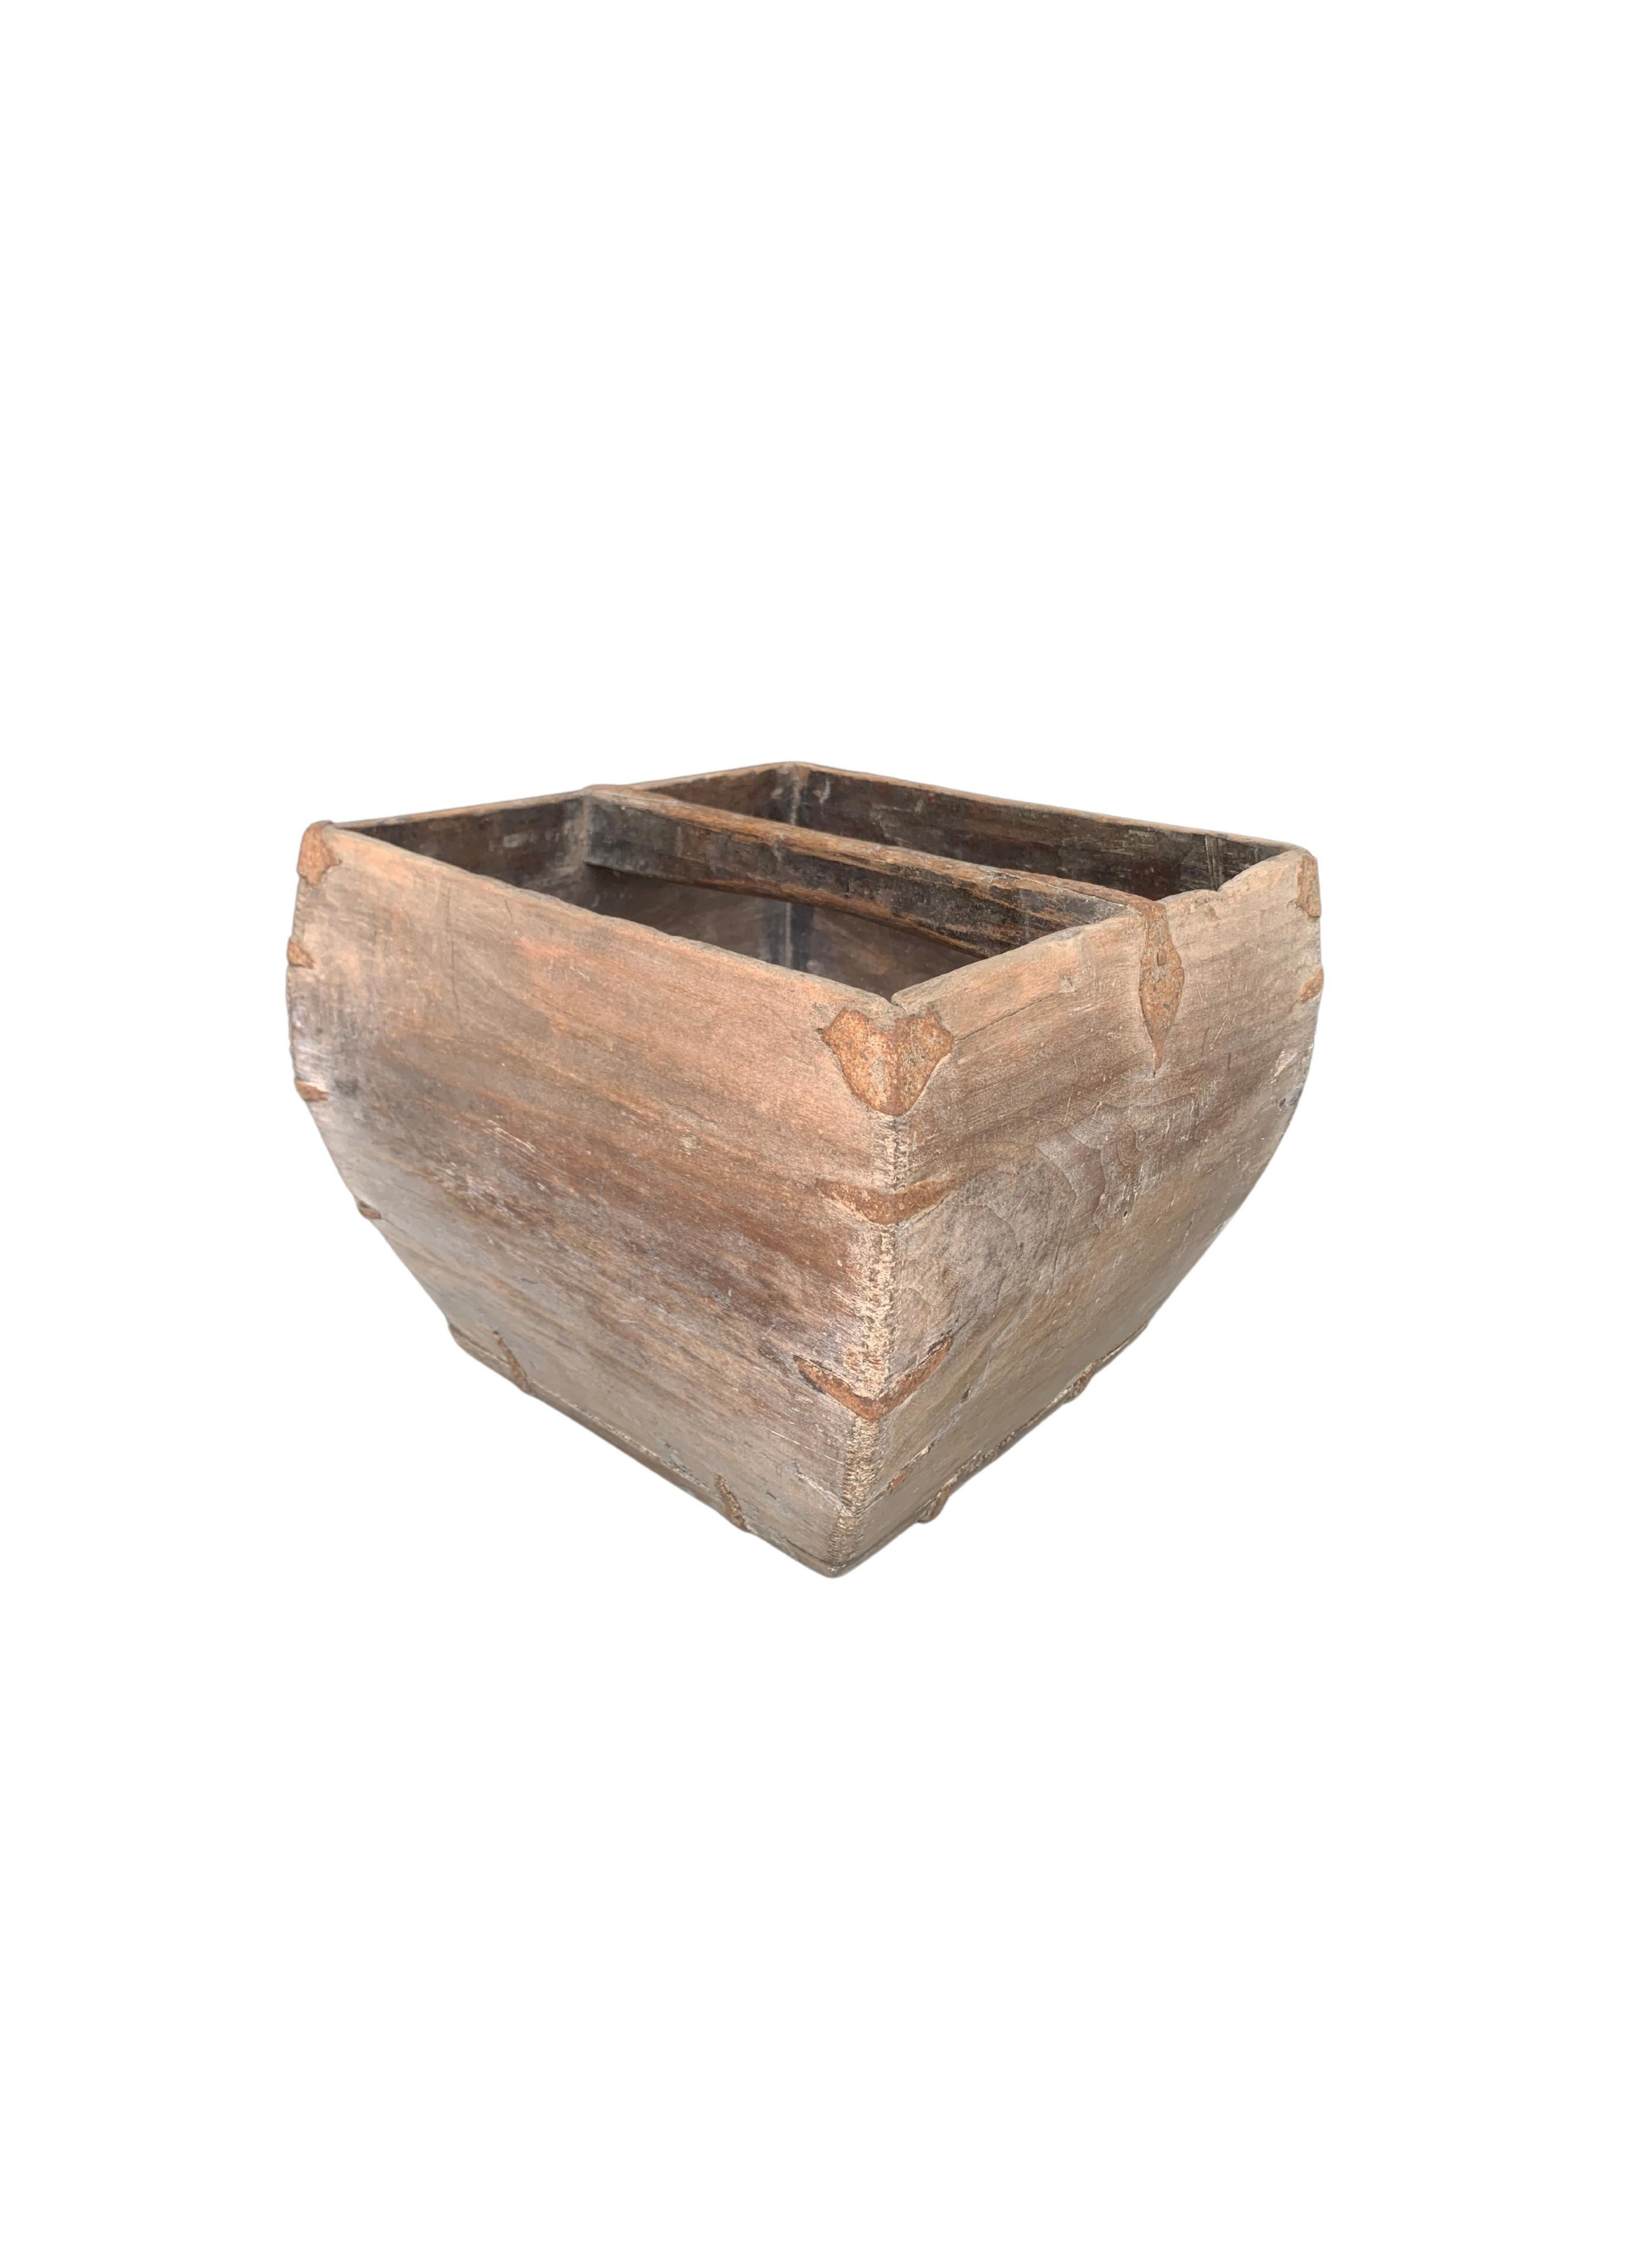 A visibly old rice measure container handcrafted more than 100 years from wood and supported by iron edges and an arched handle. There is a wonderful age related patina to the metal and wood. The container is able to hold a Dou of rice a once